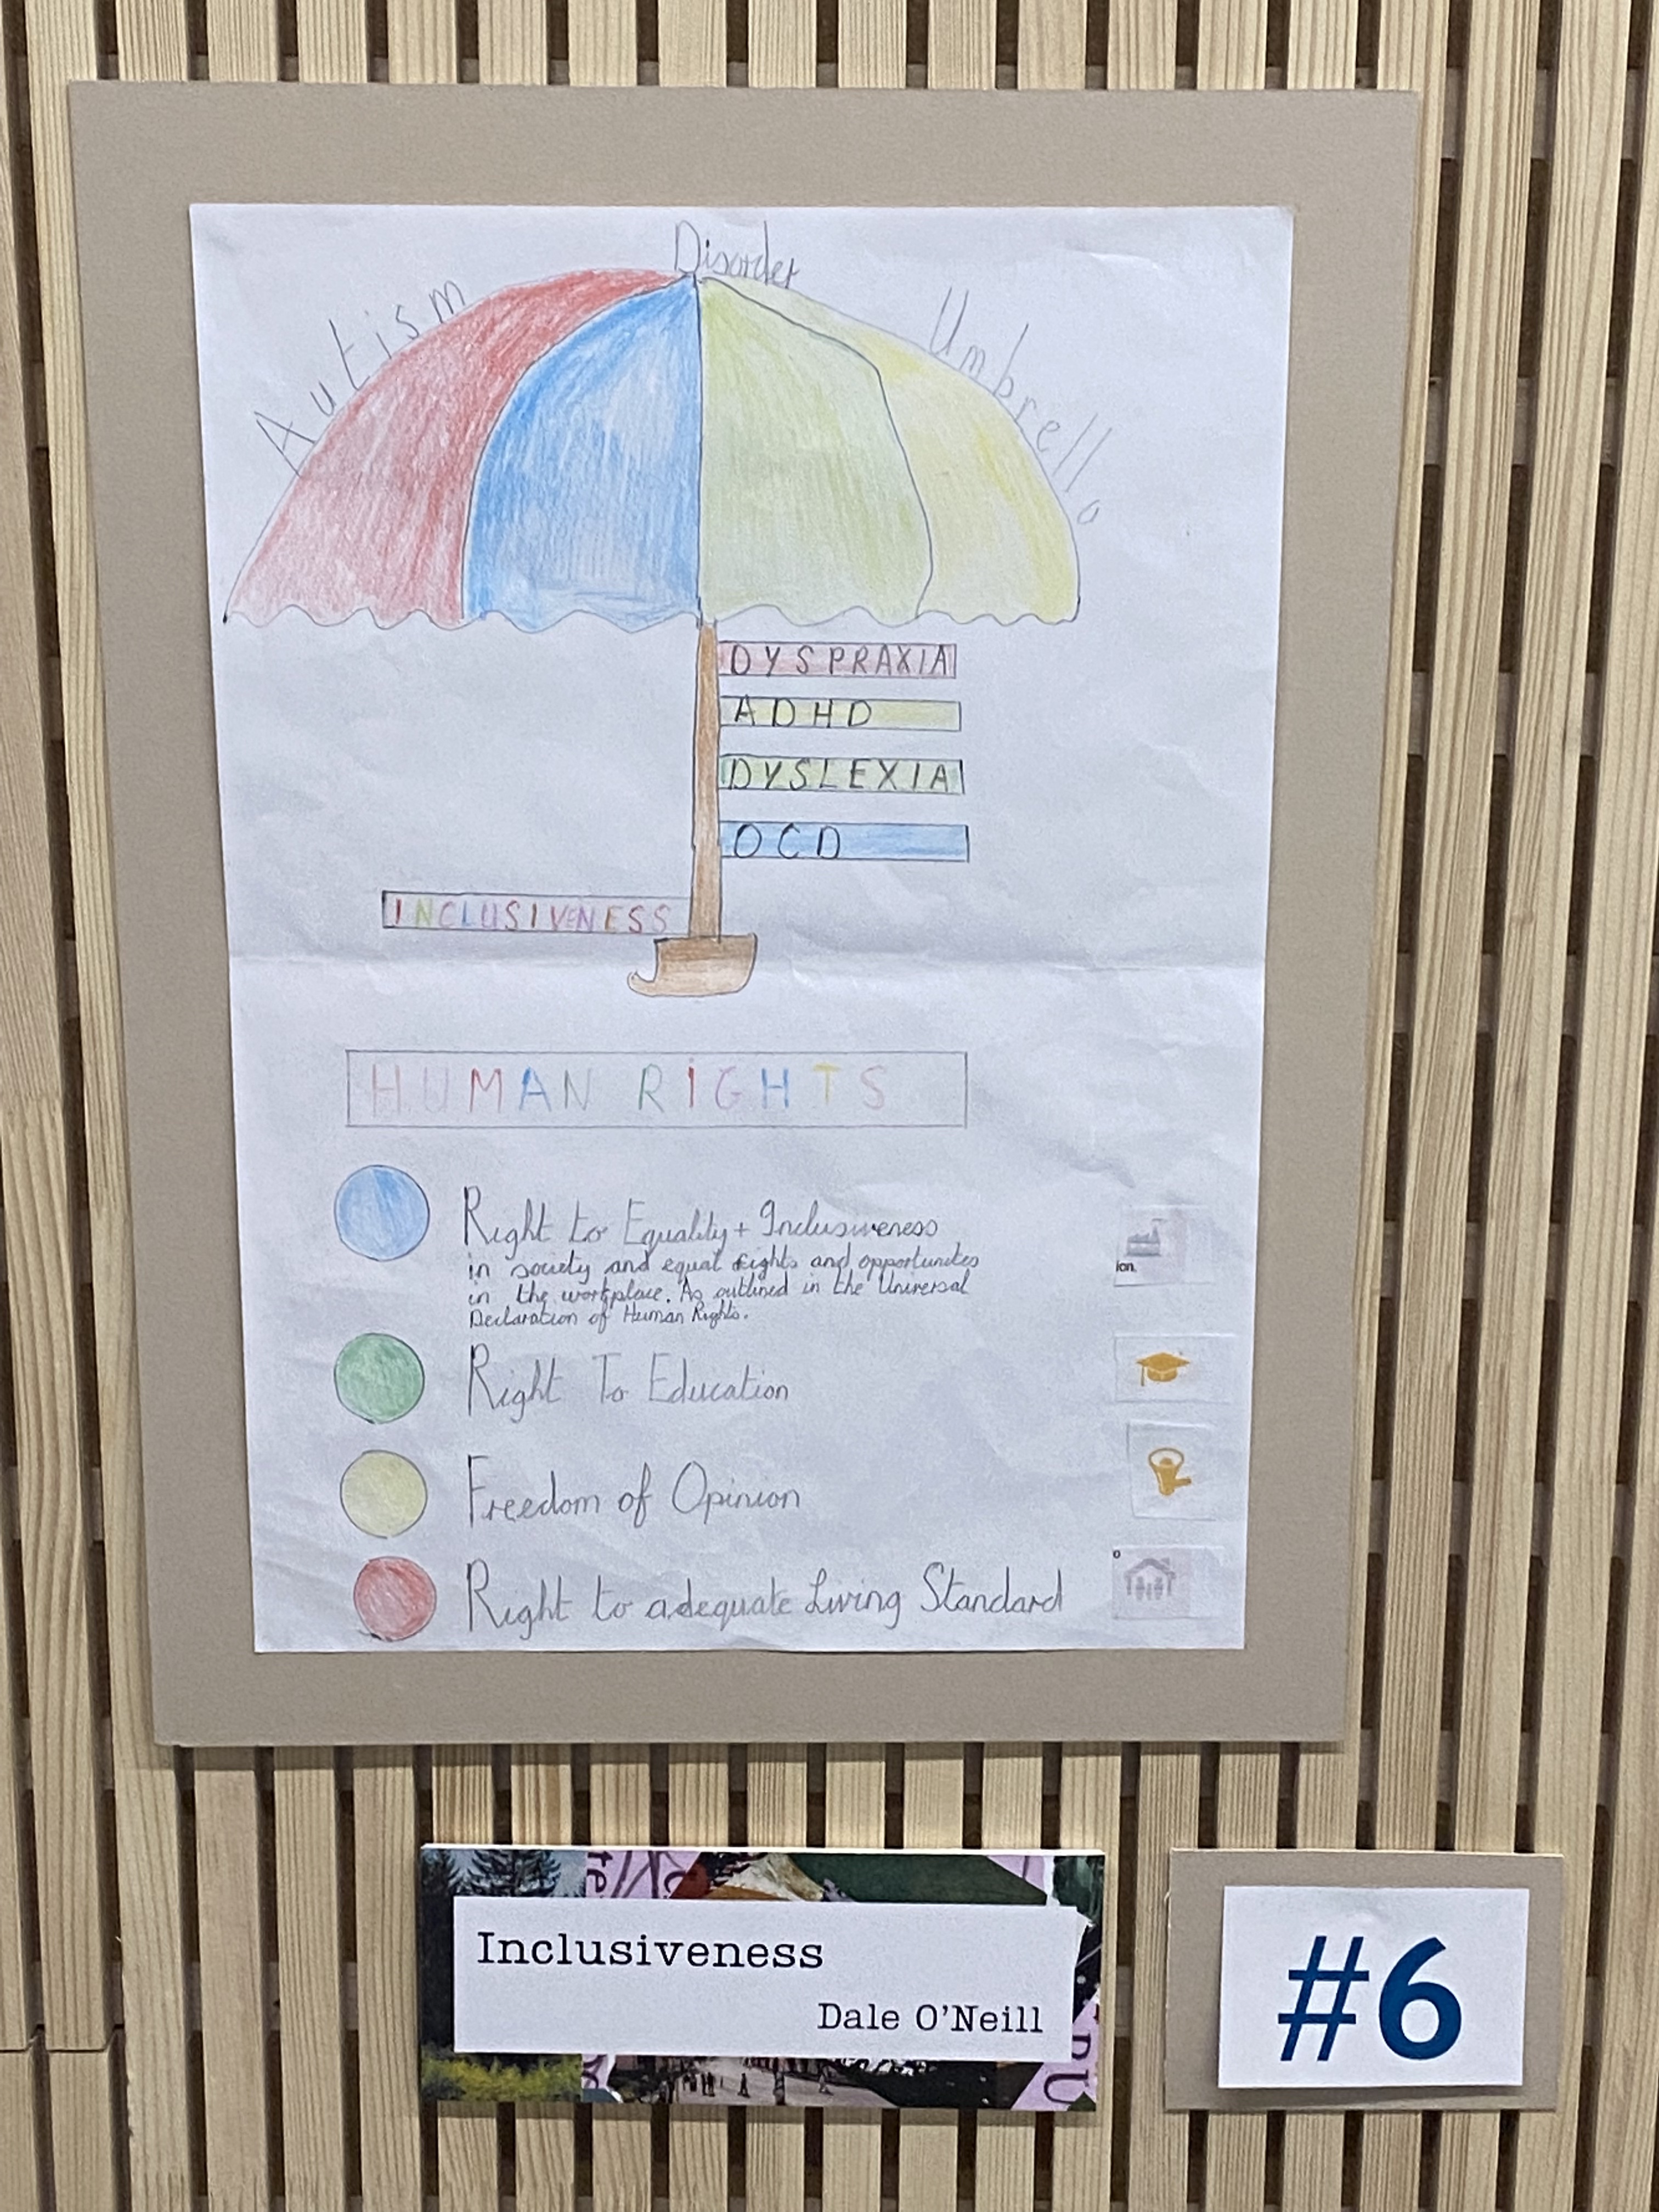 In this drawing there is an umbrella. The unbrella is sectioned into four colurs; red, blue, green, and yellow. The are words above the umbrella; Autism, Disorder, and umbrella. Below the canopy of the umbrella are the words; Dyspraxia, ADAH, Dyslexia, and OCD. Below the umbrella are the words; Human Rights. Below this are 4 sentences, and there are circles at the beginning of each sentence. The circles are in different colours; blue, green, yellow, and red. The blue circles reads 'Right to equality + inclusiveness in society and equal rights and opportunities in the workplace. As outlined in the Universal Declaration of Human Rights'. The green circle reads 'Right to Education'. The yellow circle reads 'Freedom of Opinion'. The red circle reads 'Right to adequate Living Standard.'